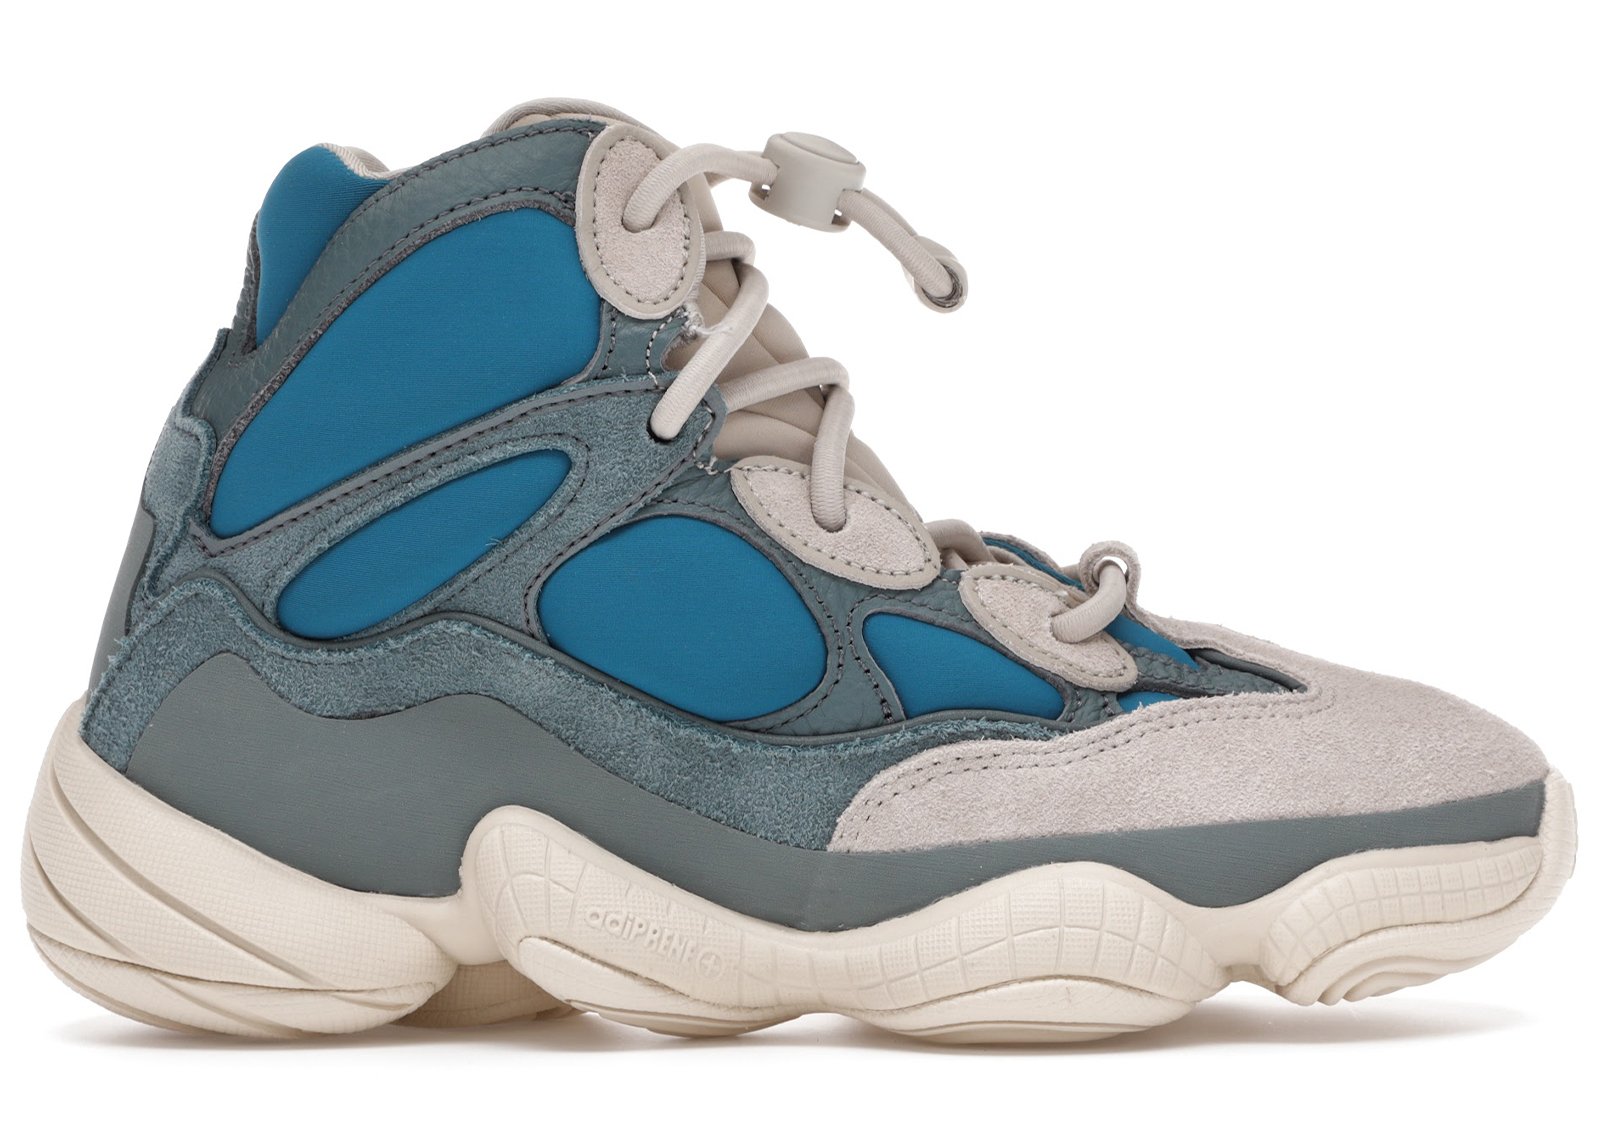 adidas Yeezy 500 High Frosted Blue sneakers